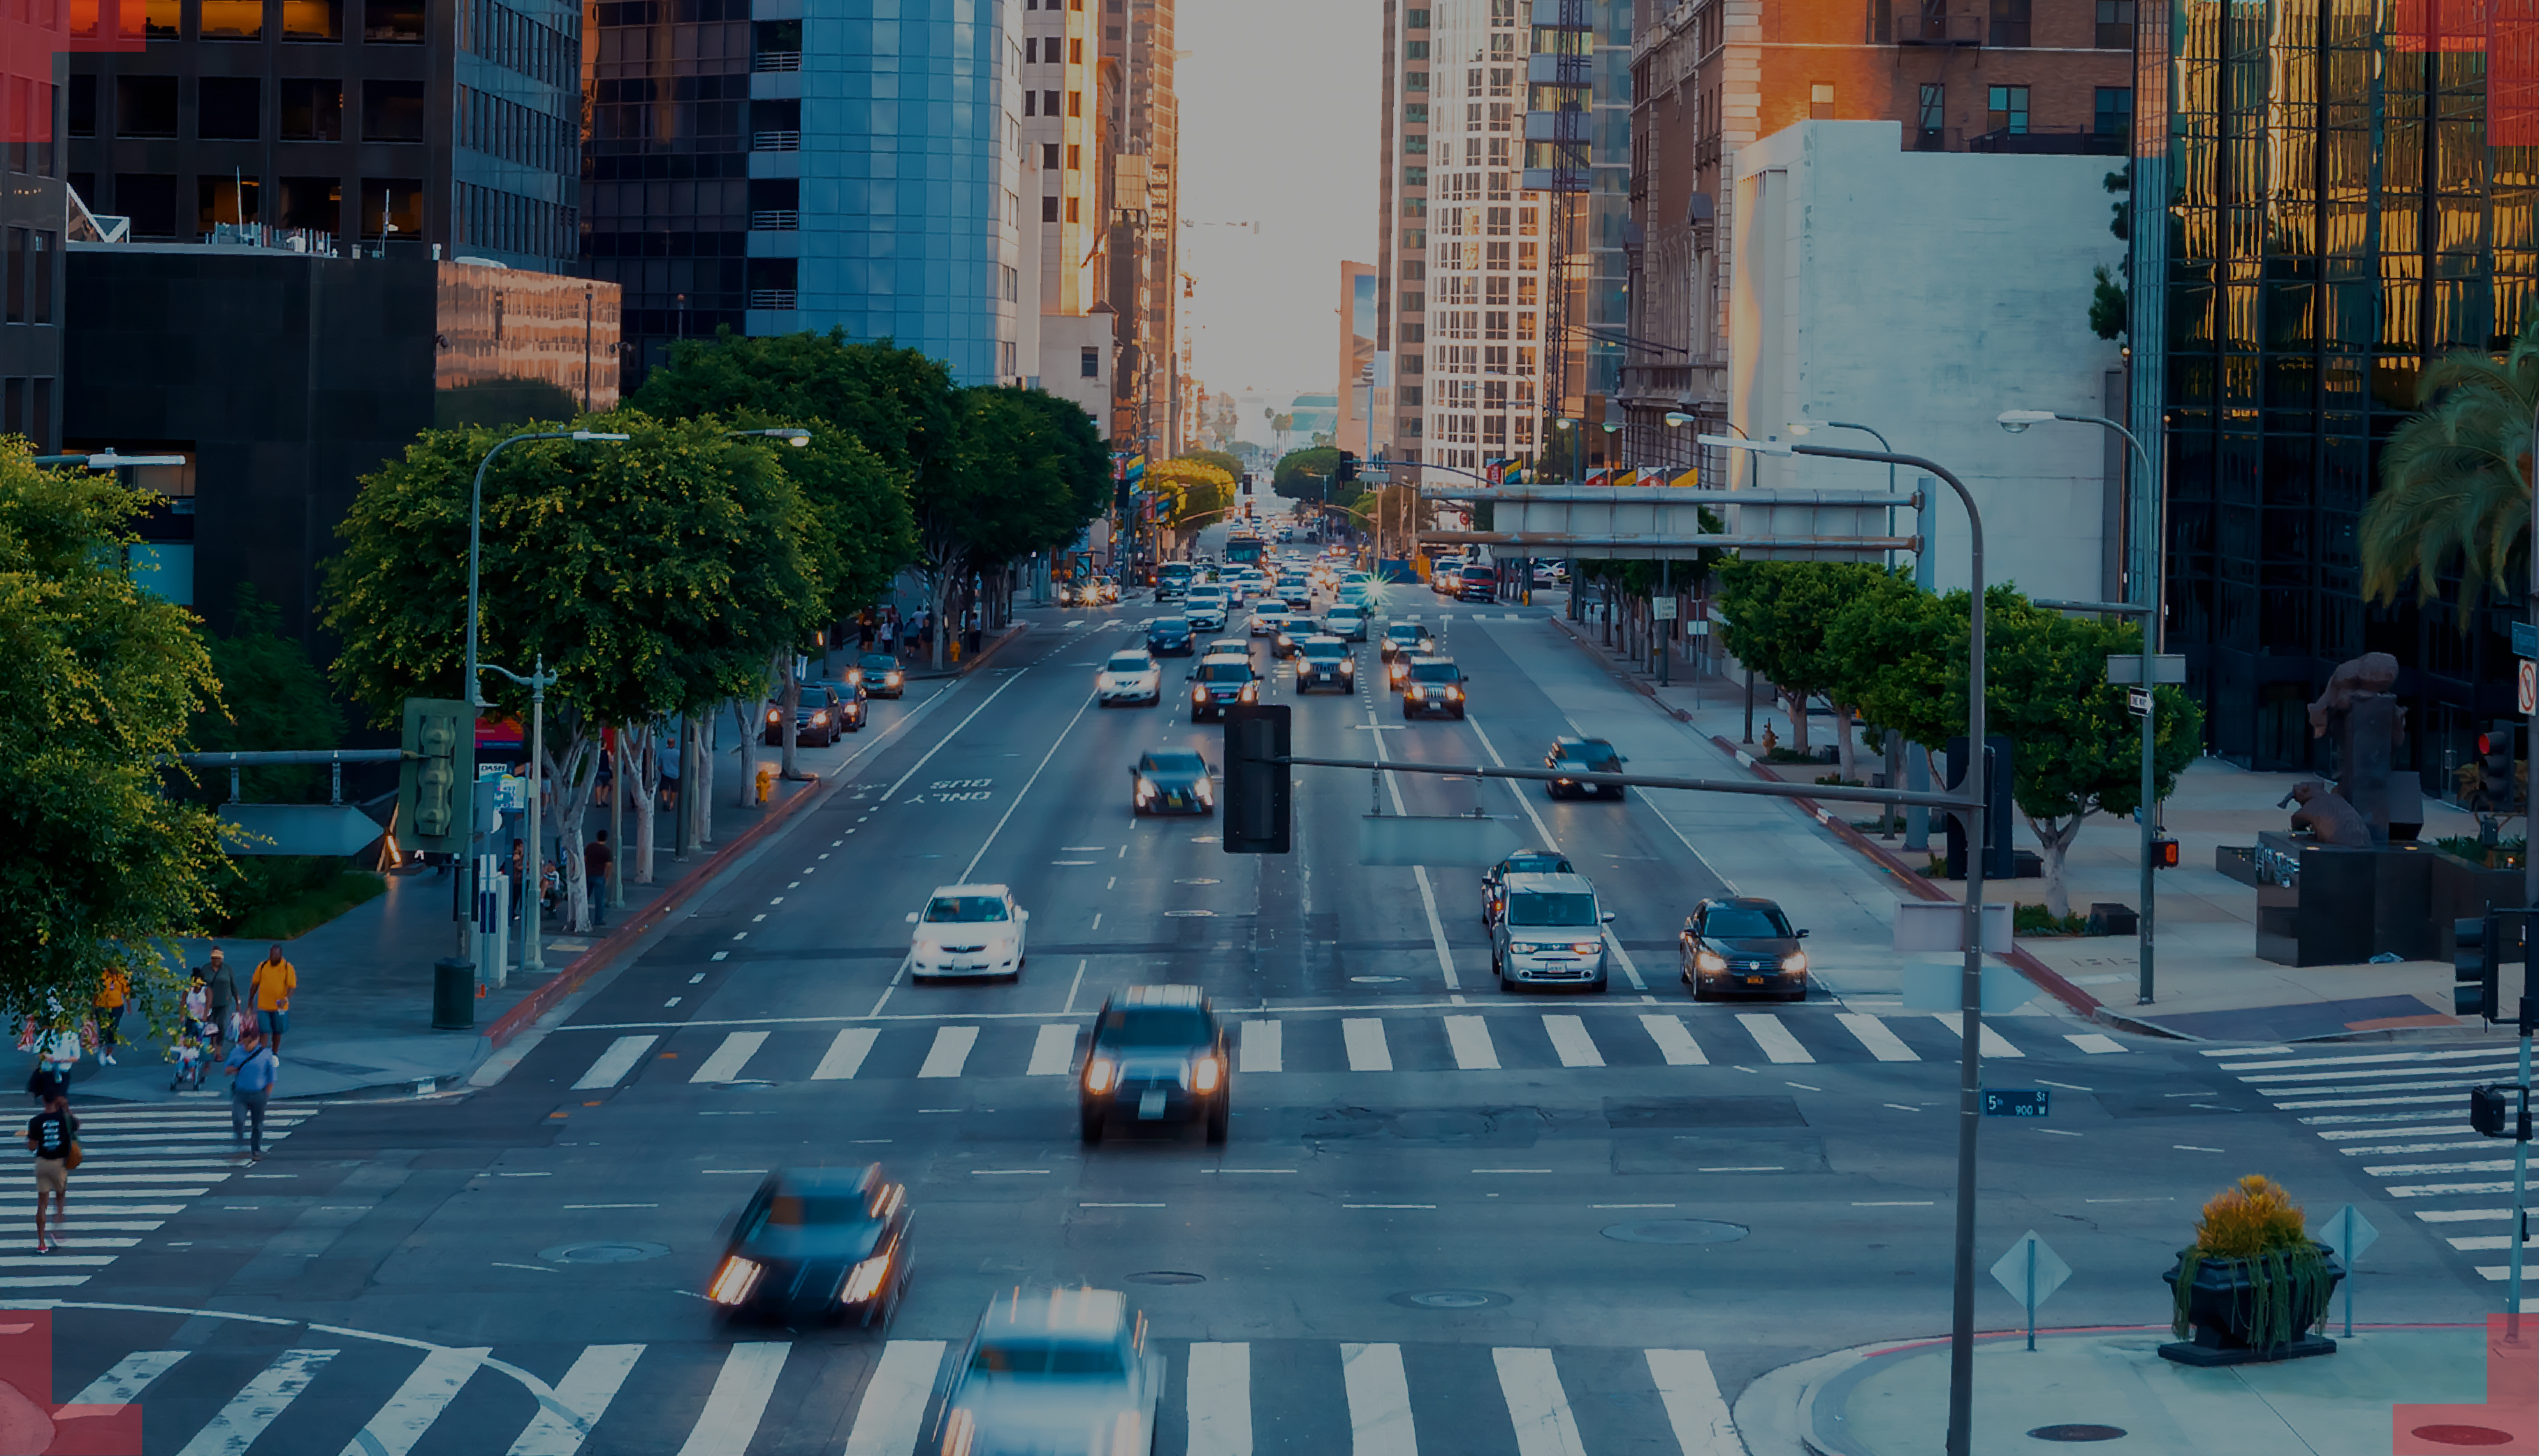 Smart Intersections: Vision AI Solution for Real-Time Traffic Monitoring